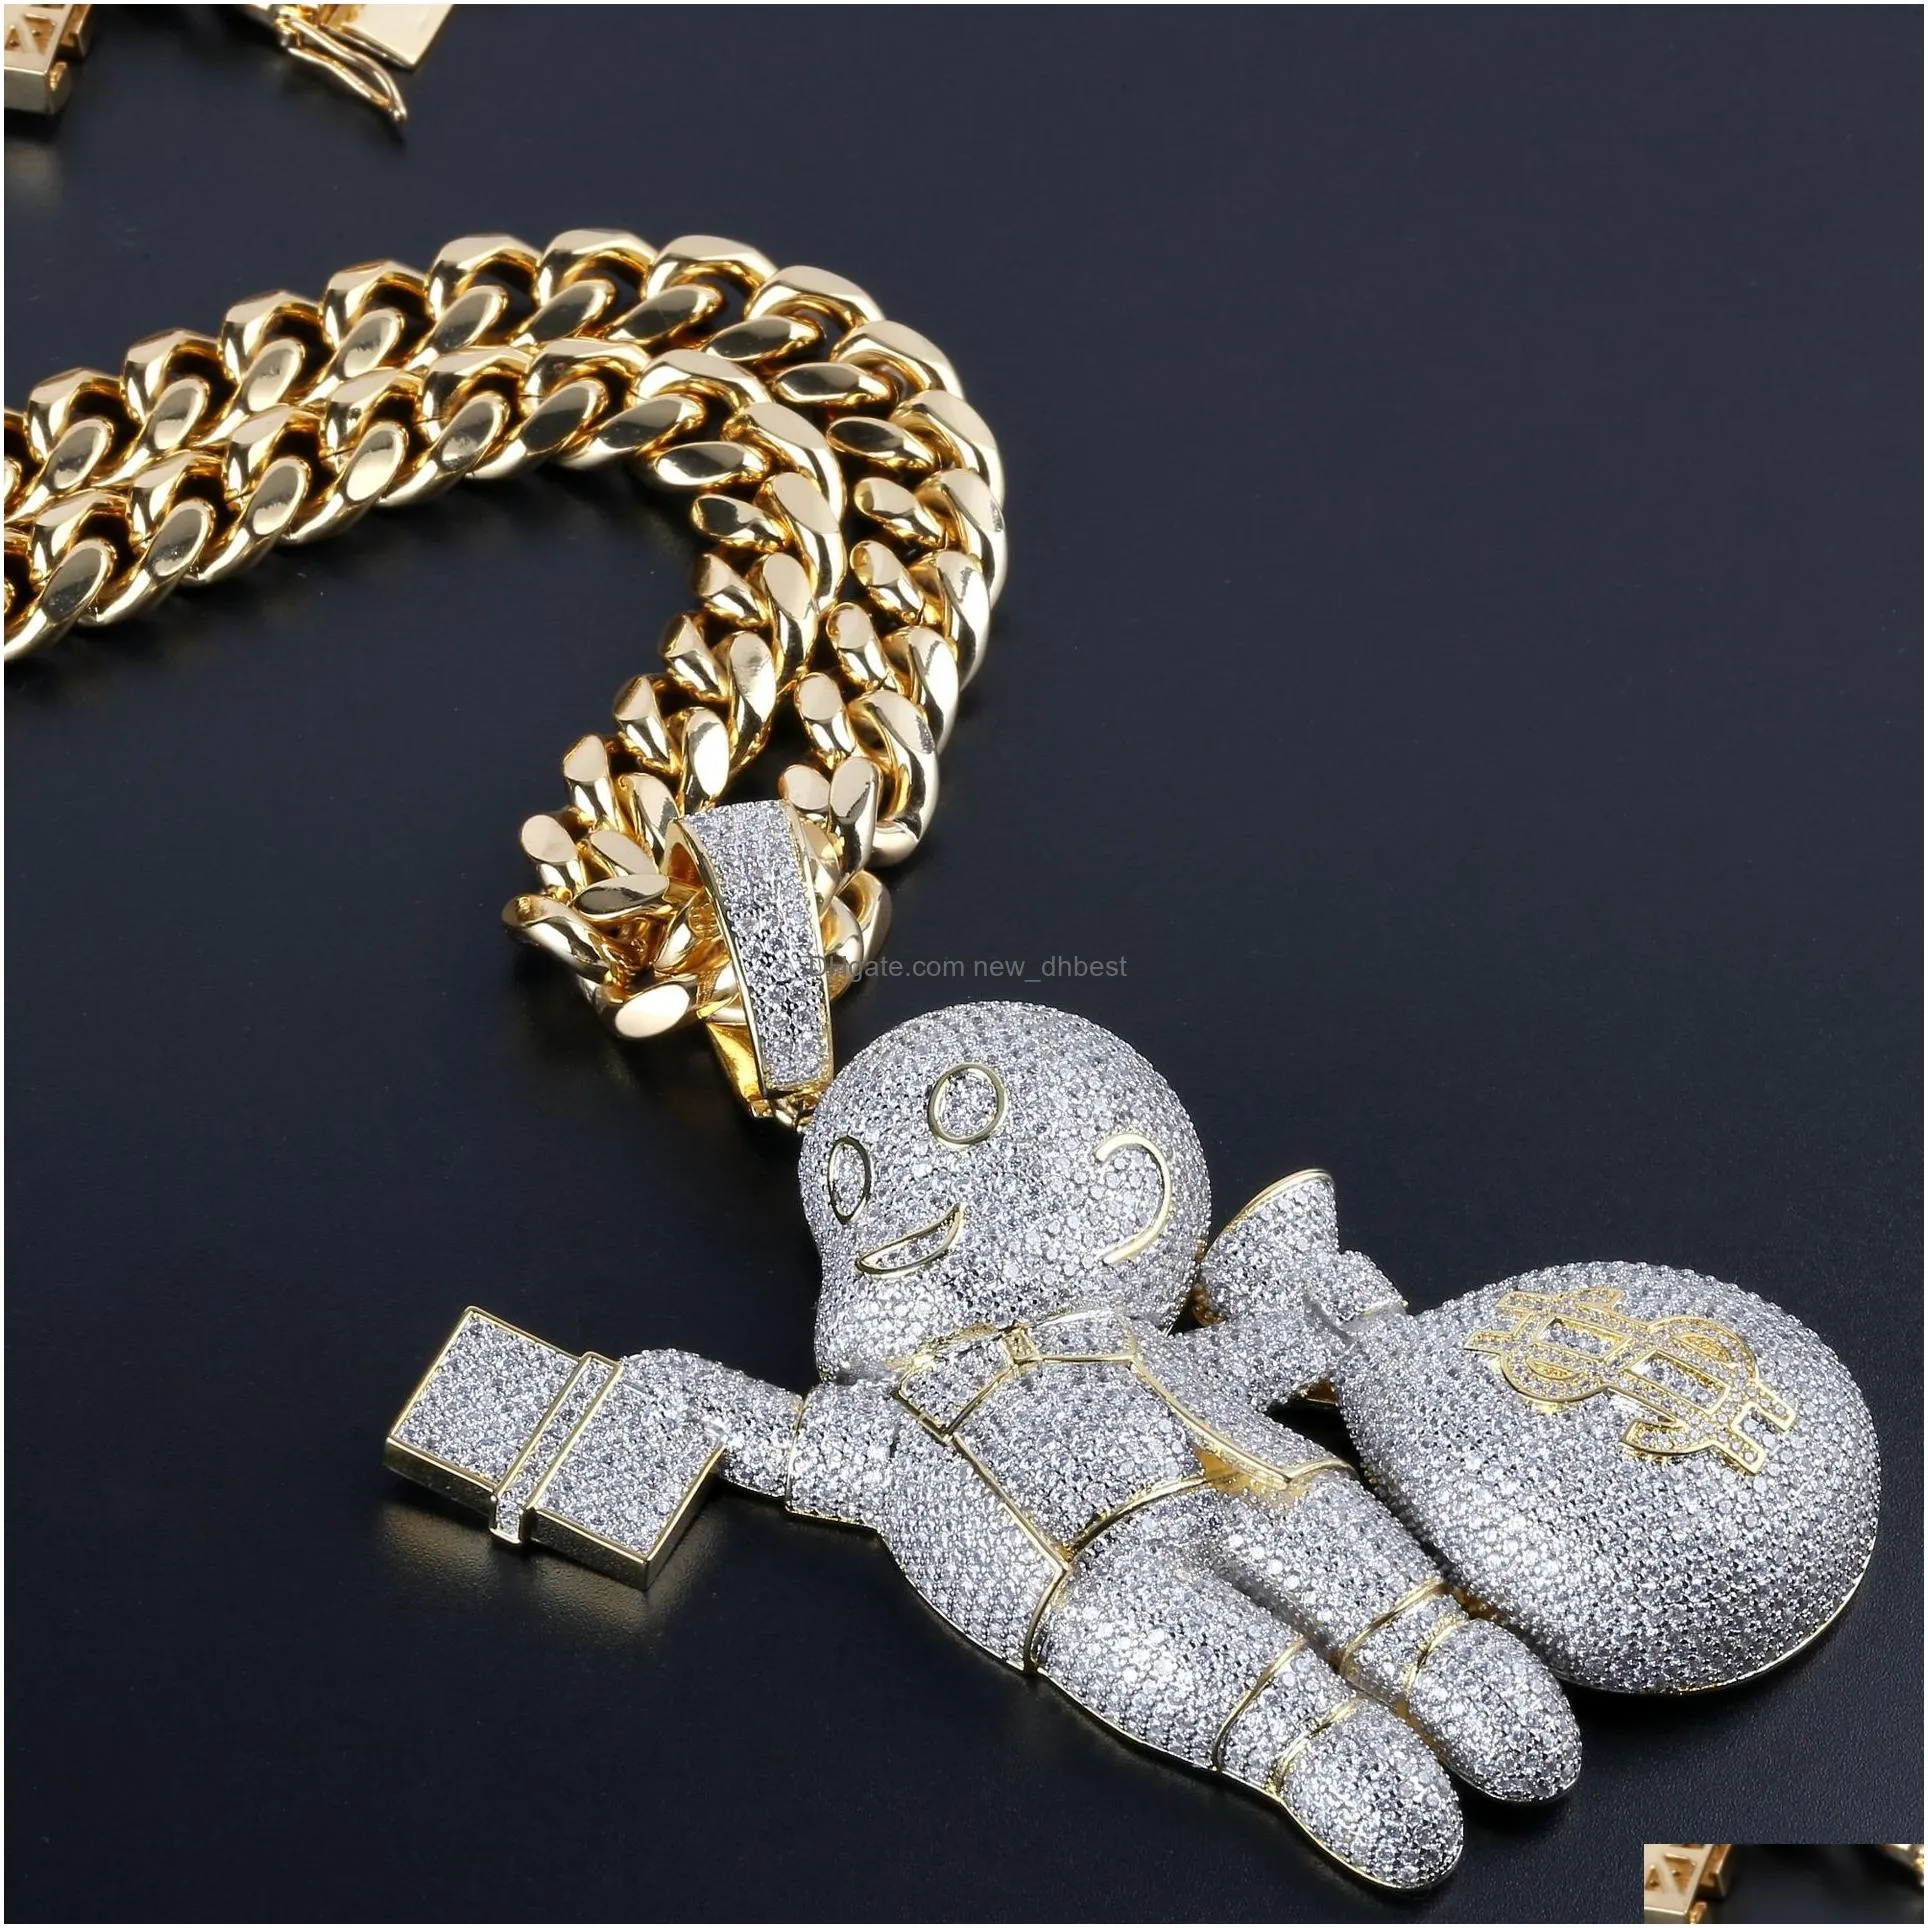 Pendant Necklaces New Personalized 18K Gold Plated Hip Hop Cartoon Boy With Big Money Bag Pendant Necklace Ed Chain Iced Out Cz Zircon Dhtpq